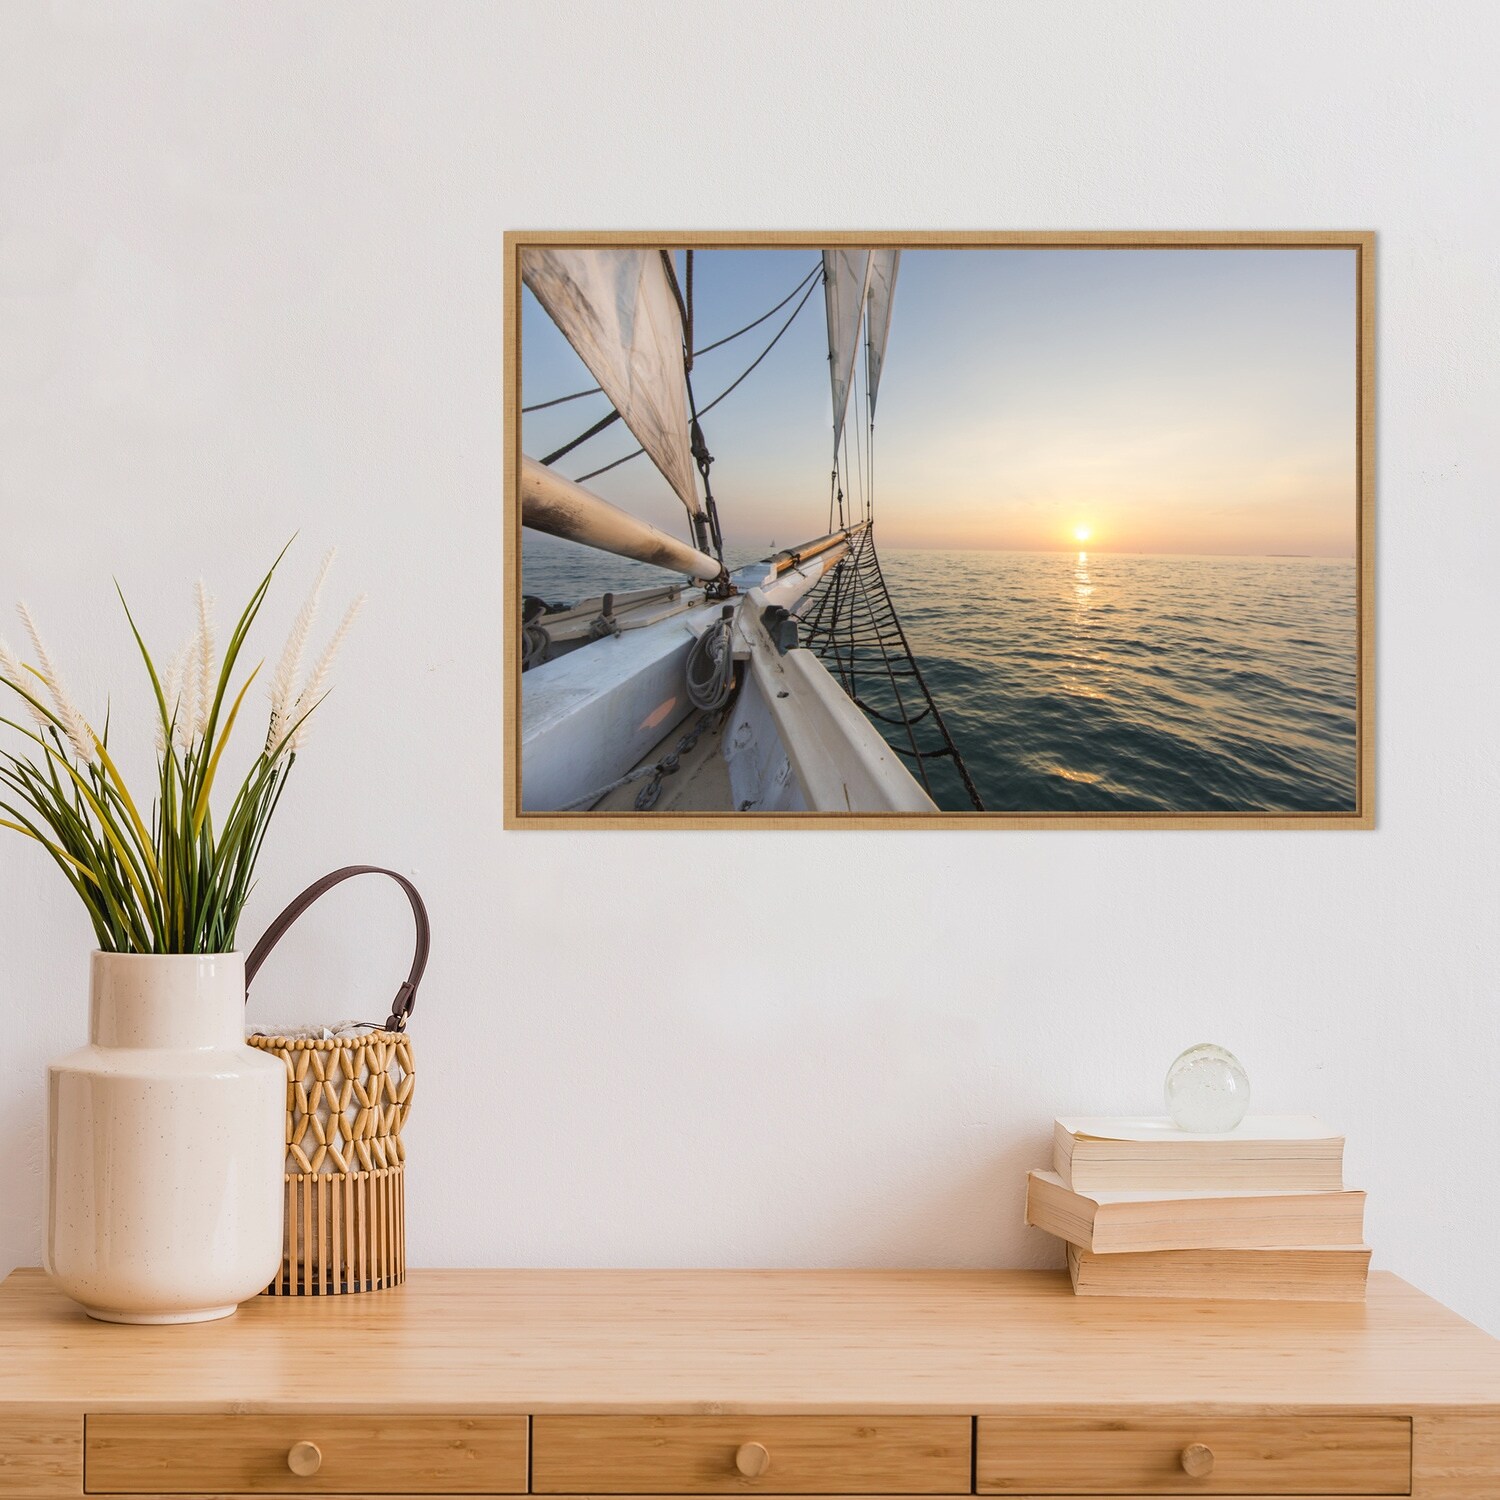 The Schooner Western Union in Key West, Florida Canvas Print by The Titled  Flamingo